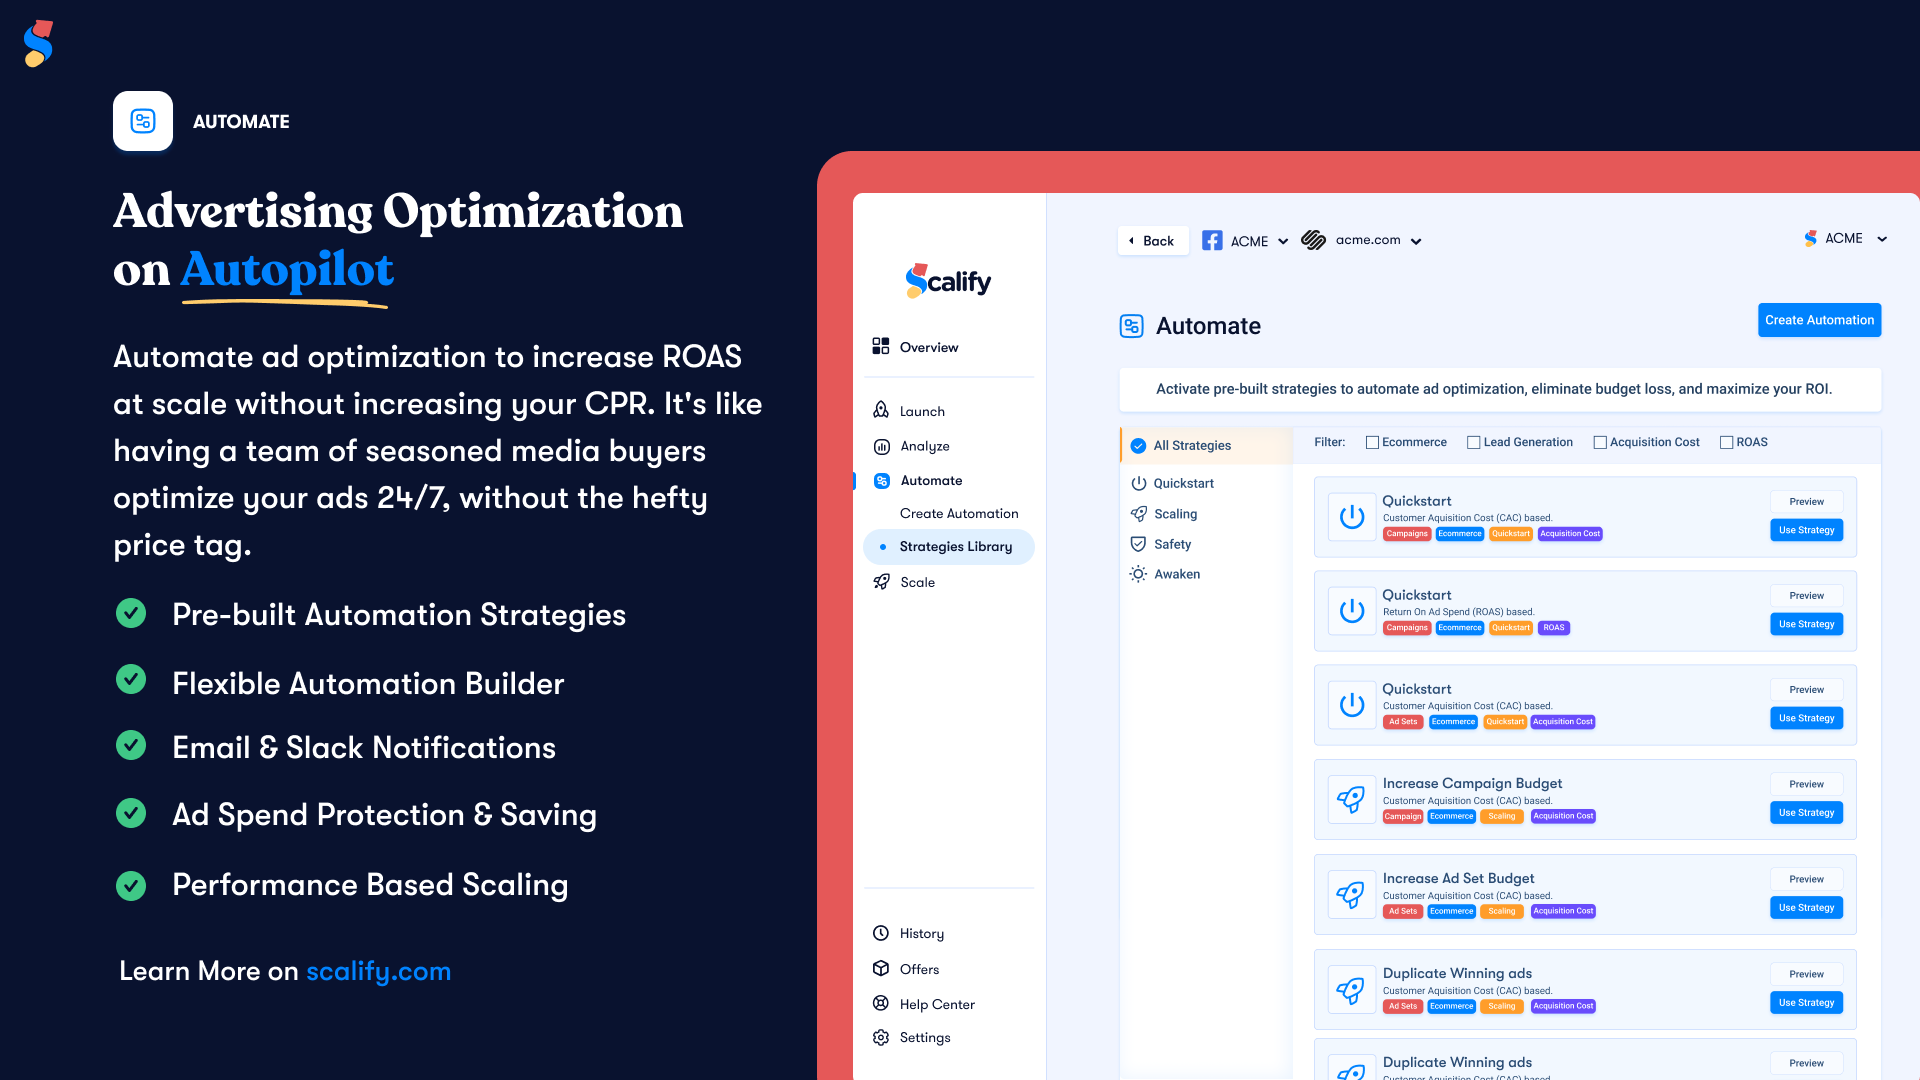 Finesse your ads for maximum conversions, avoid budget loss that hurt your business finances, and scale profitably with Scalify's automations.